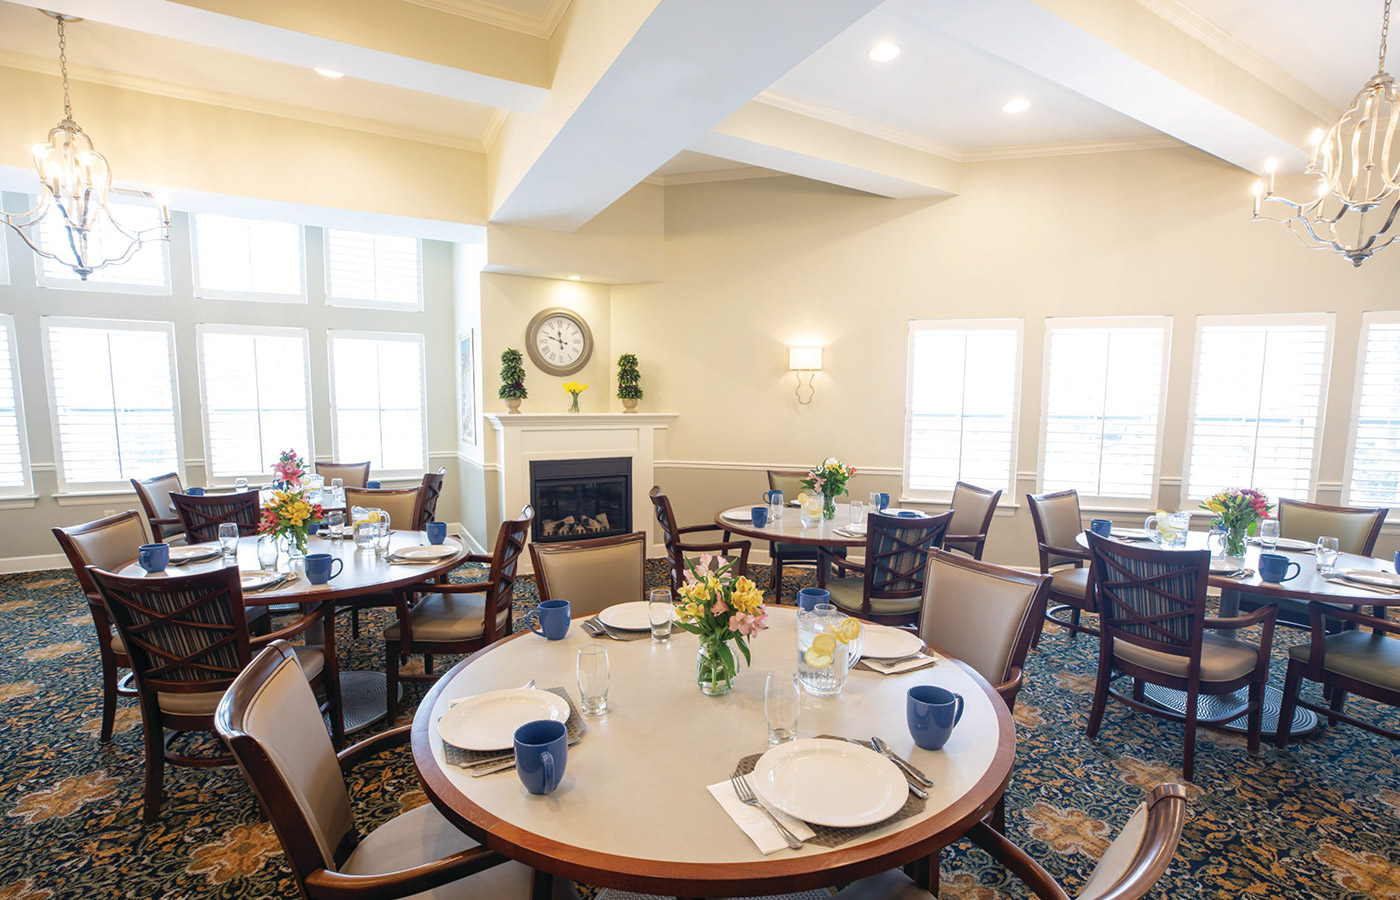 A dining area at The Legacy at Park Crescent.